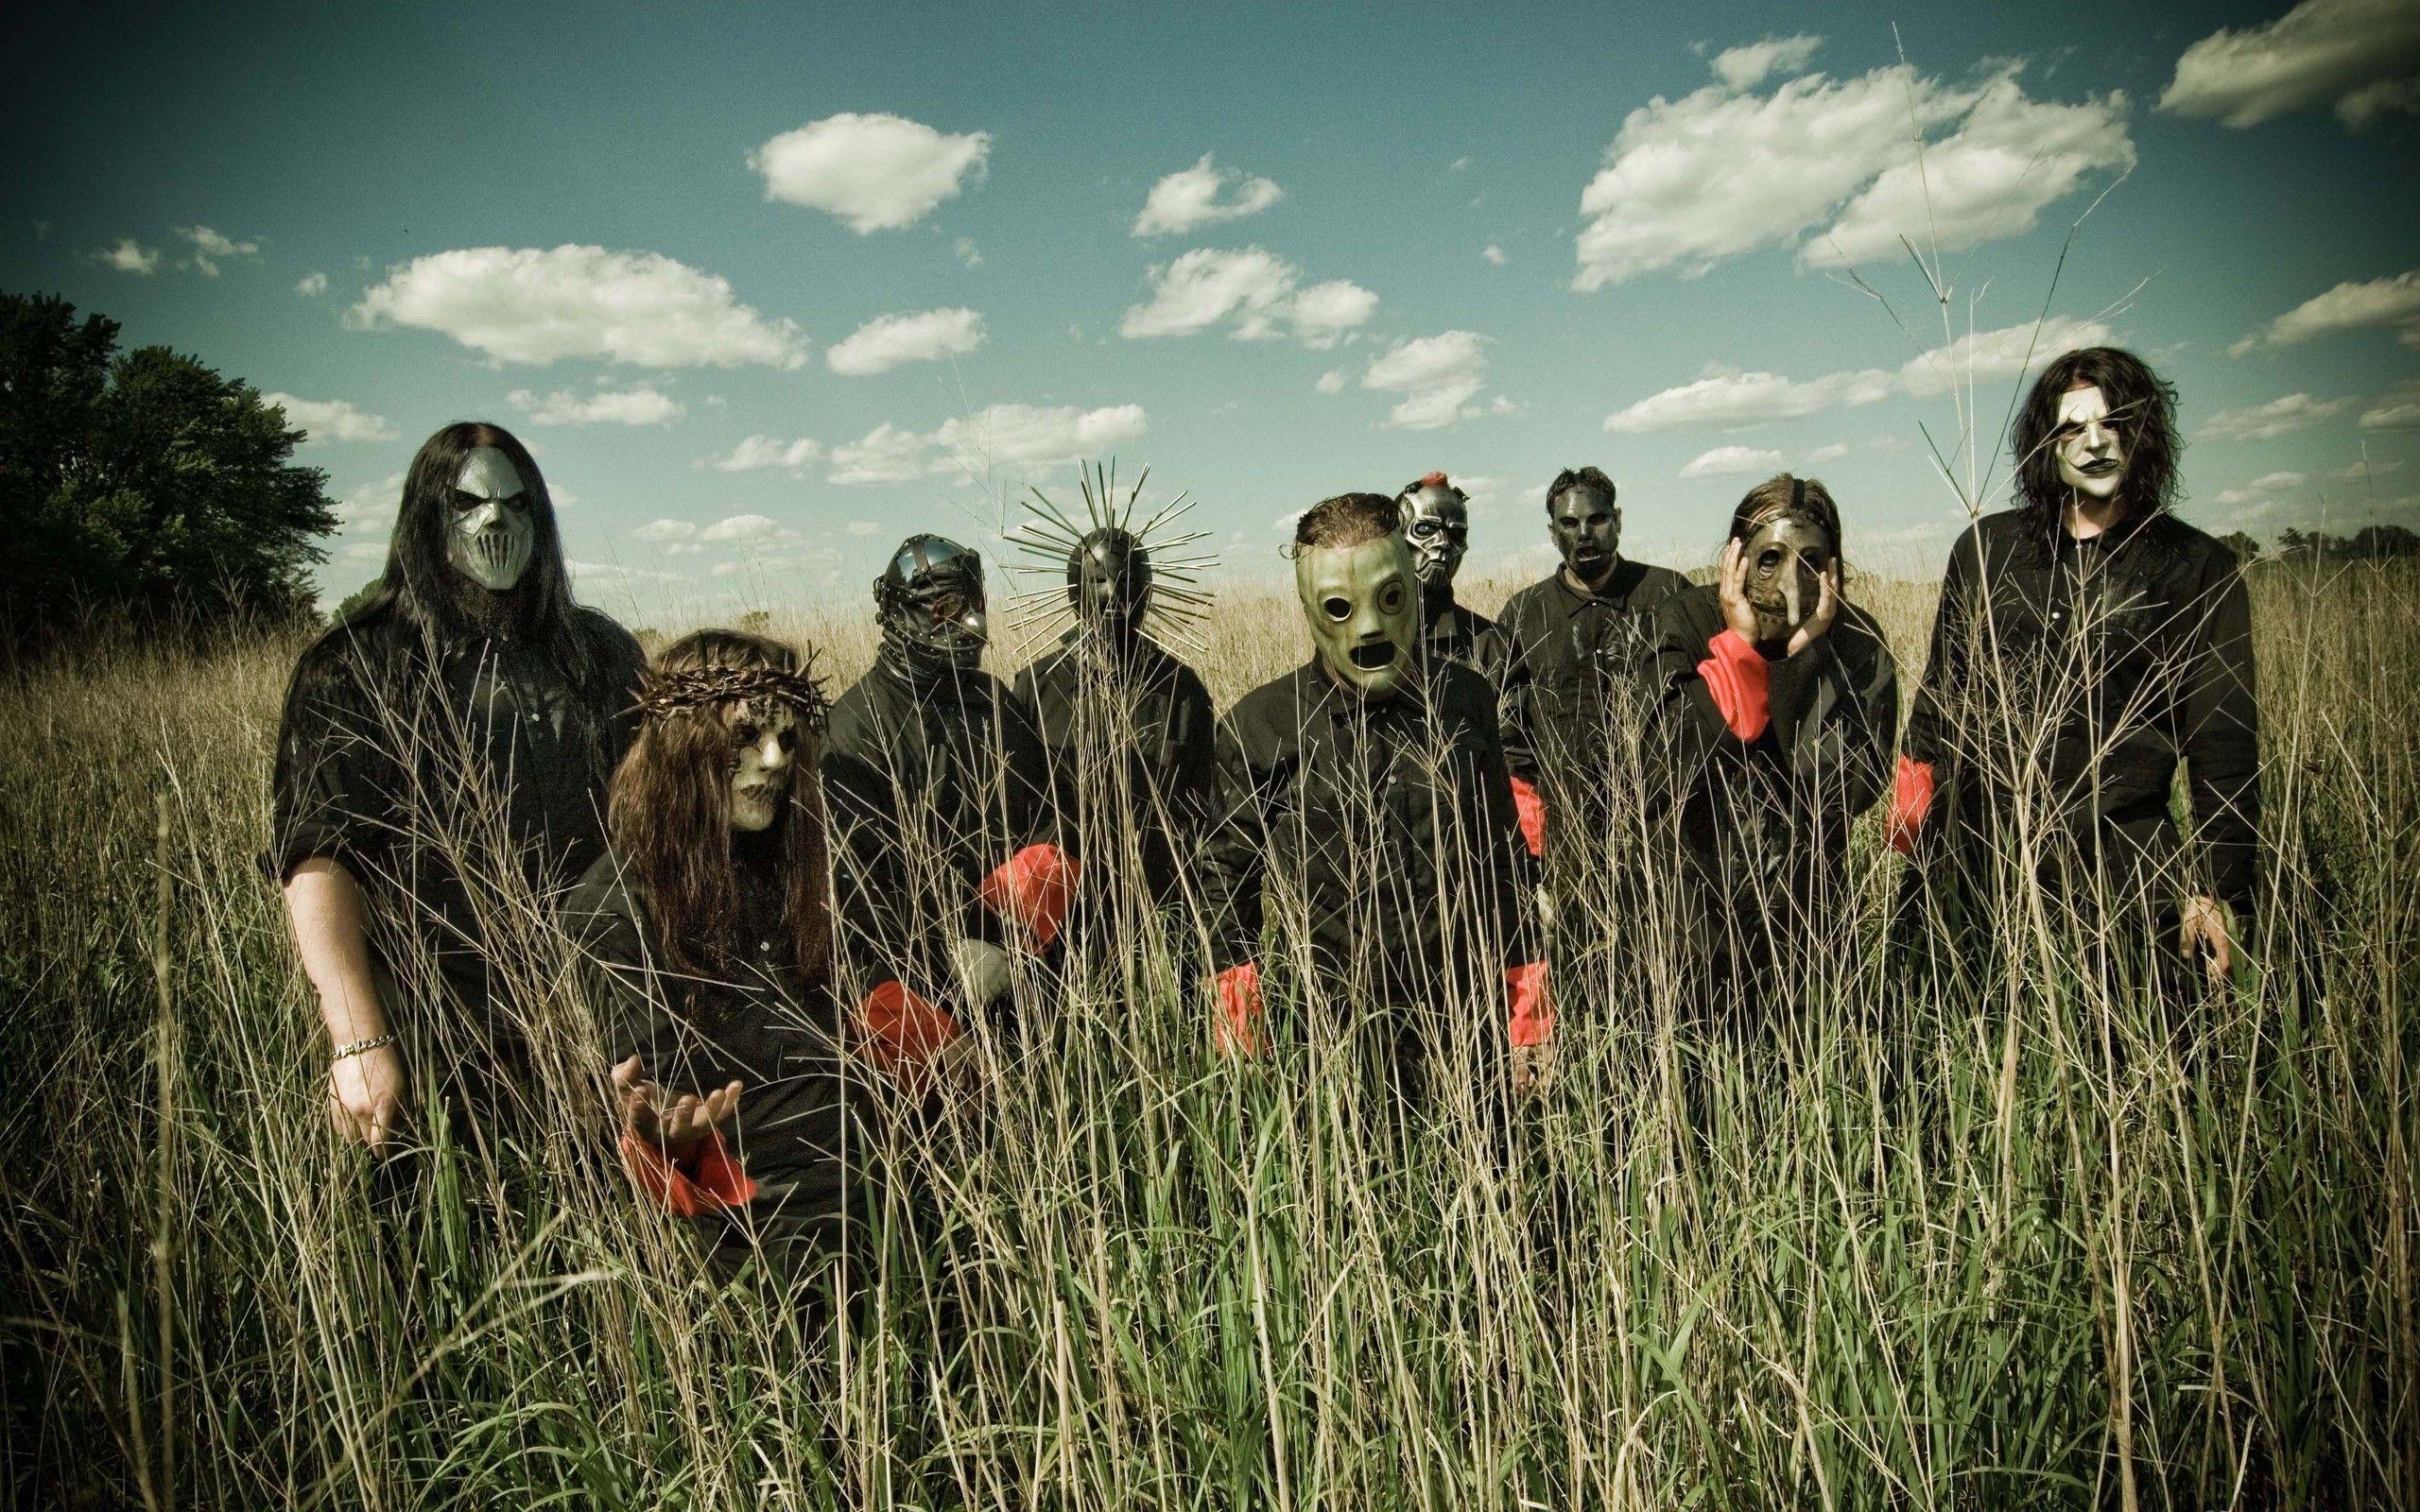 Slipknot HD Wallpaper and Background Image